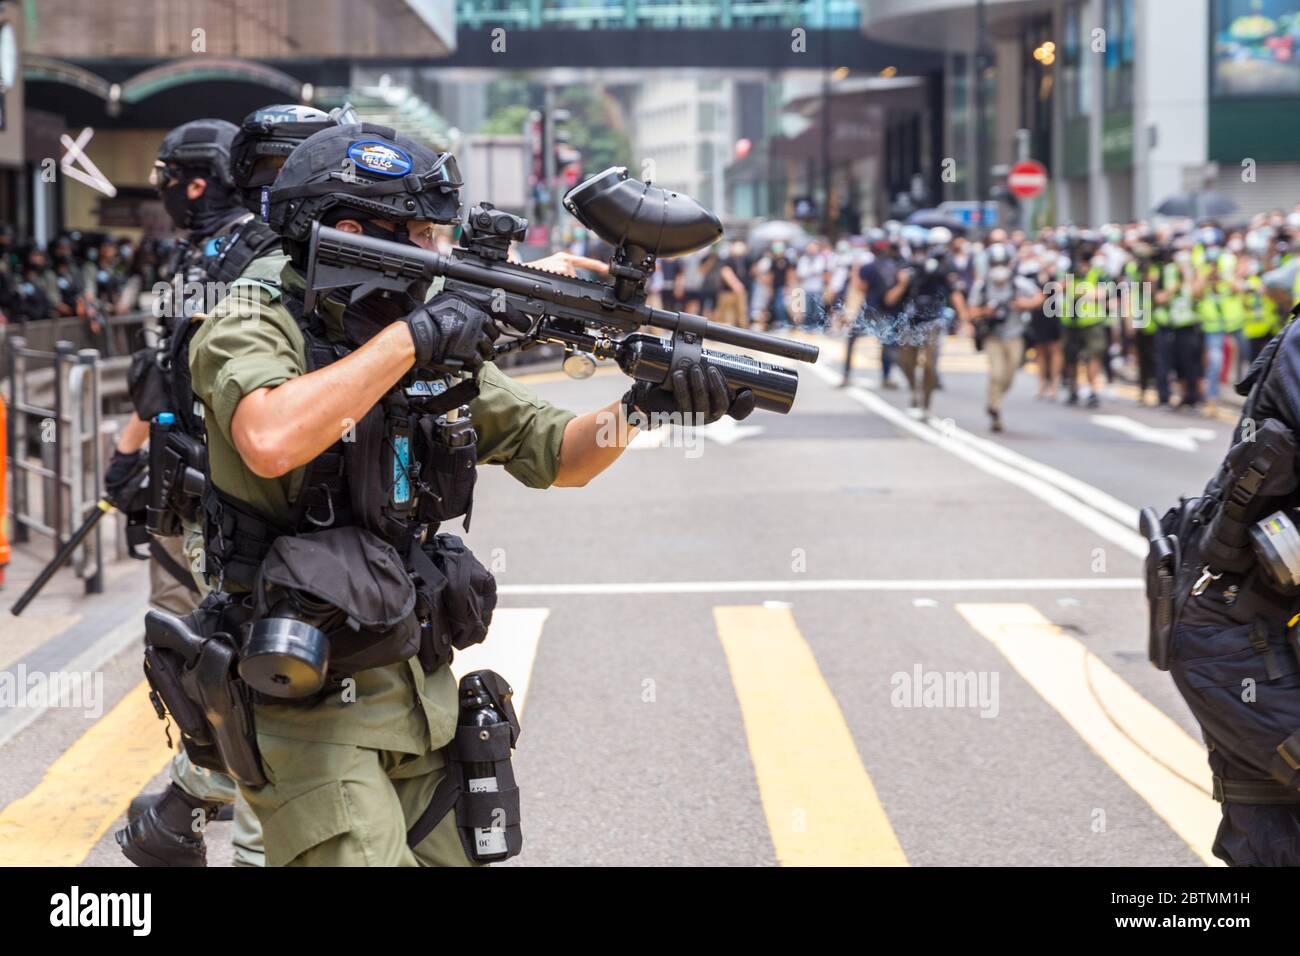 Central, Hong Kong. 27 May, 2020 Hong Kong Protest Anti-National Anthem Law. Police officer firing pepper balls into the crowd. Credit: David Ogg / Alamy Live News Stock Photo